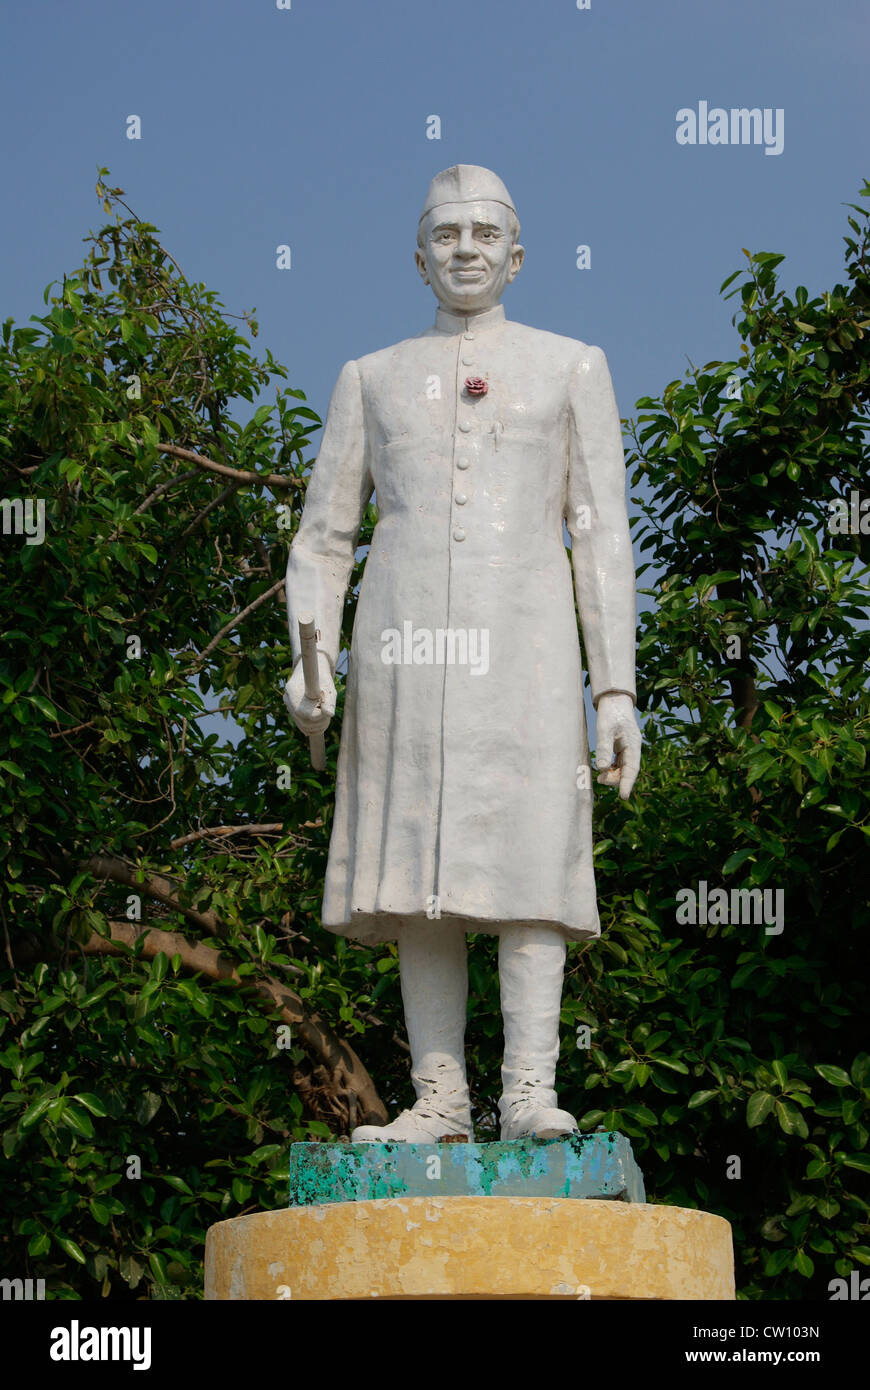 Jawaharlal Nehru Sculpture Monument in Pondicherry puducherry Tamil Nadu India.First Indian Prime Minister and Political Leader Stock Photo